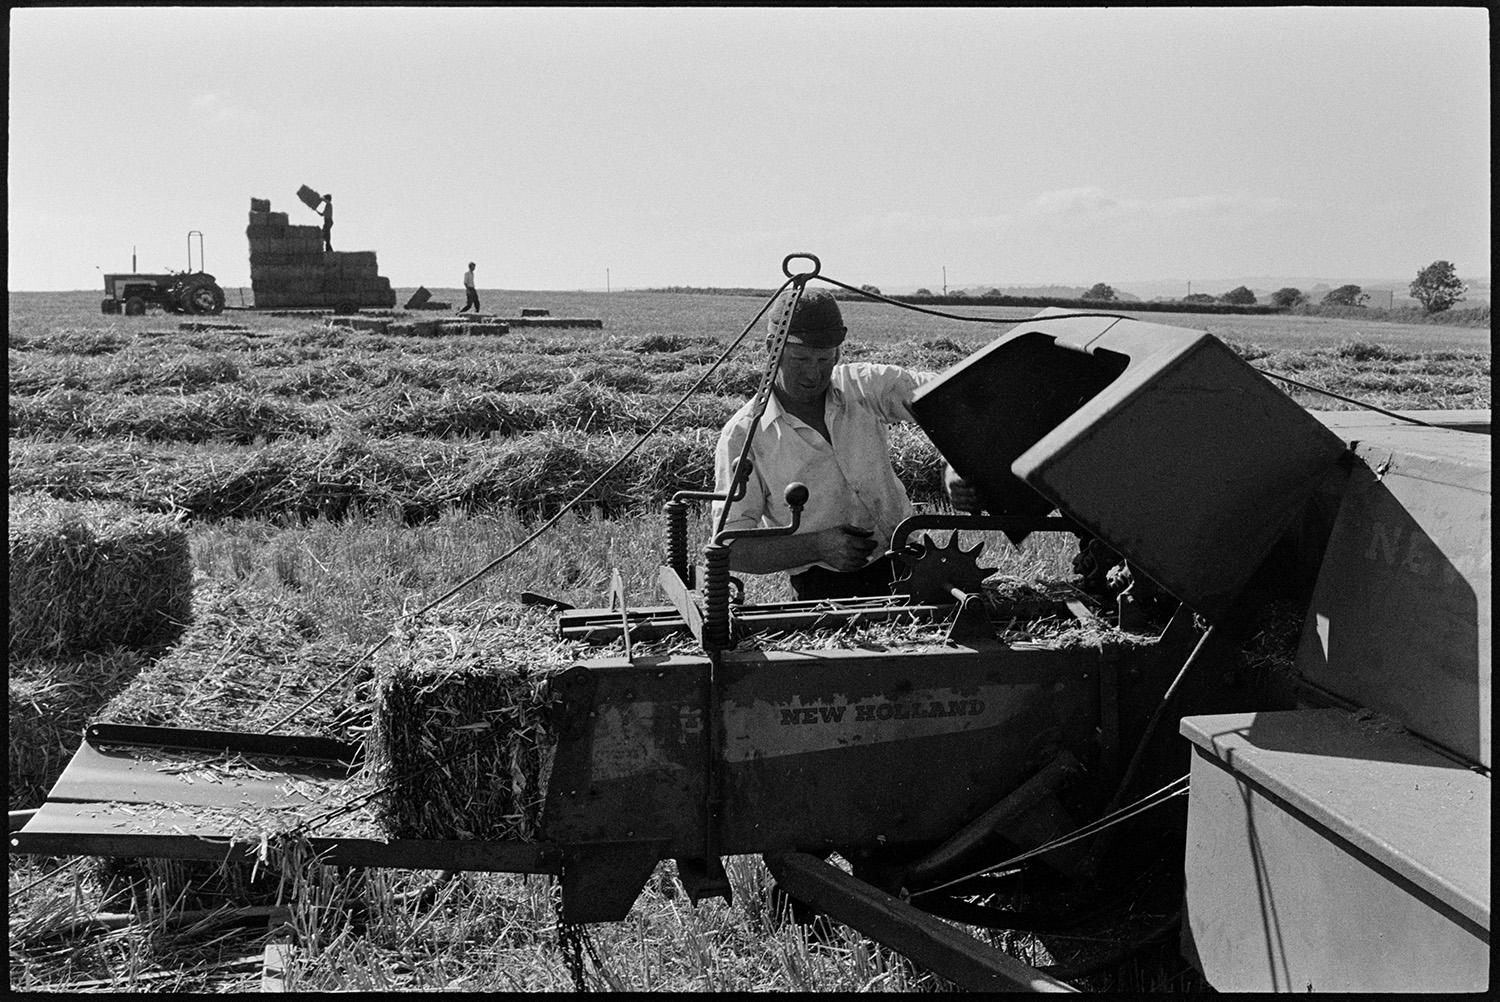 Haymaking, putting hay in barn. 
[A man checking a baler in a field at Dowland. In the background people can be seen loading hay bales onto a tractor and trailer.]